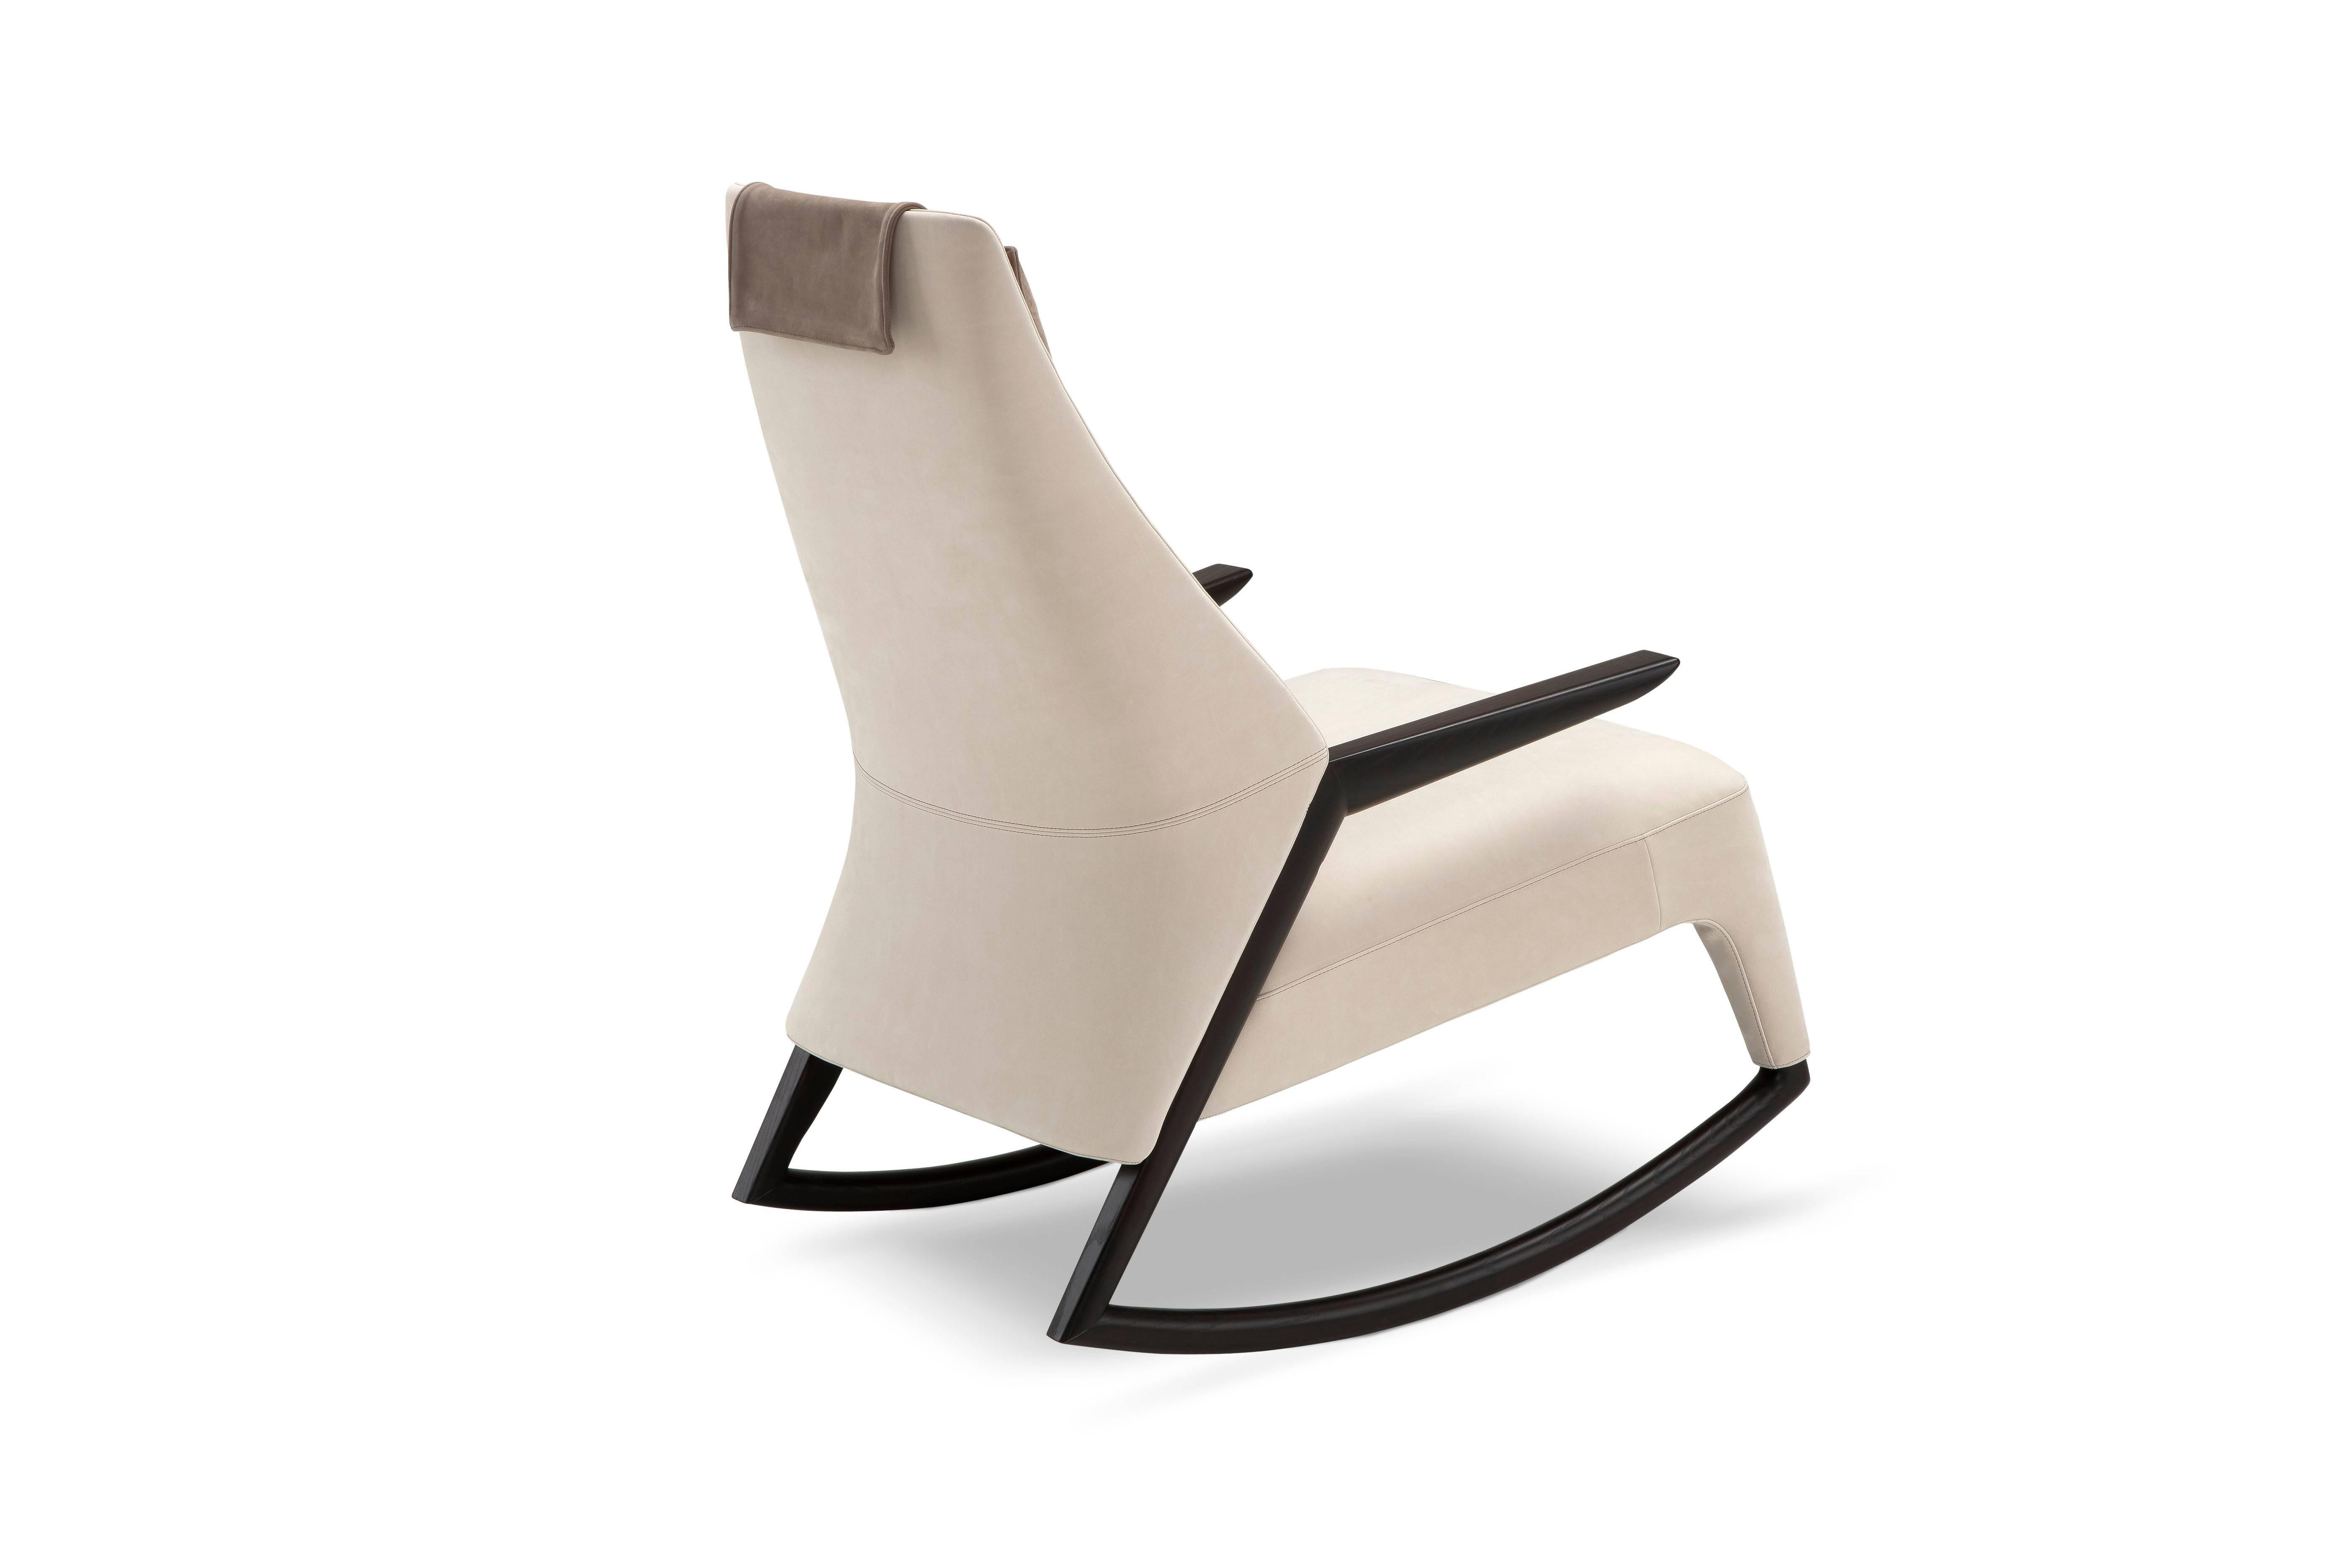 How do you renew the tradition of the rocking chair with a contemporary approach? The Coccolo armchair does this by playing with chromatic juxtaposition and the desire to enhance them.